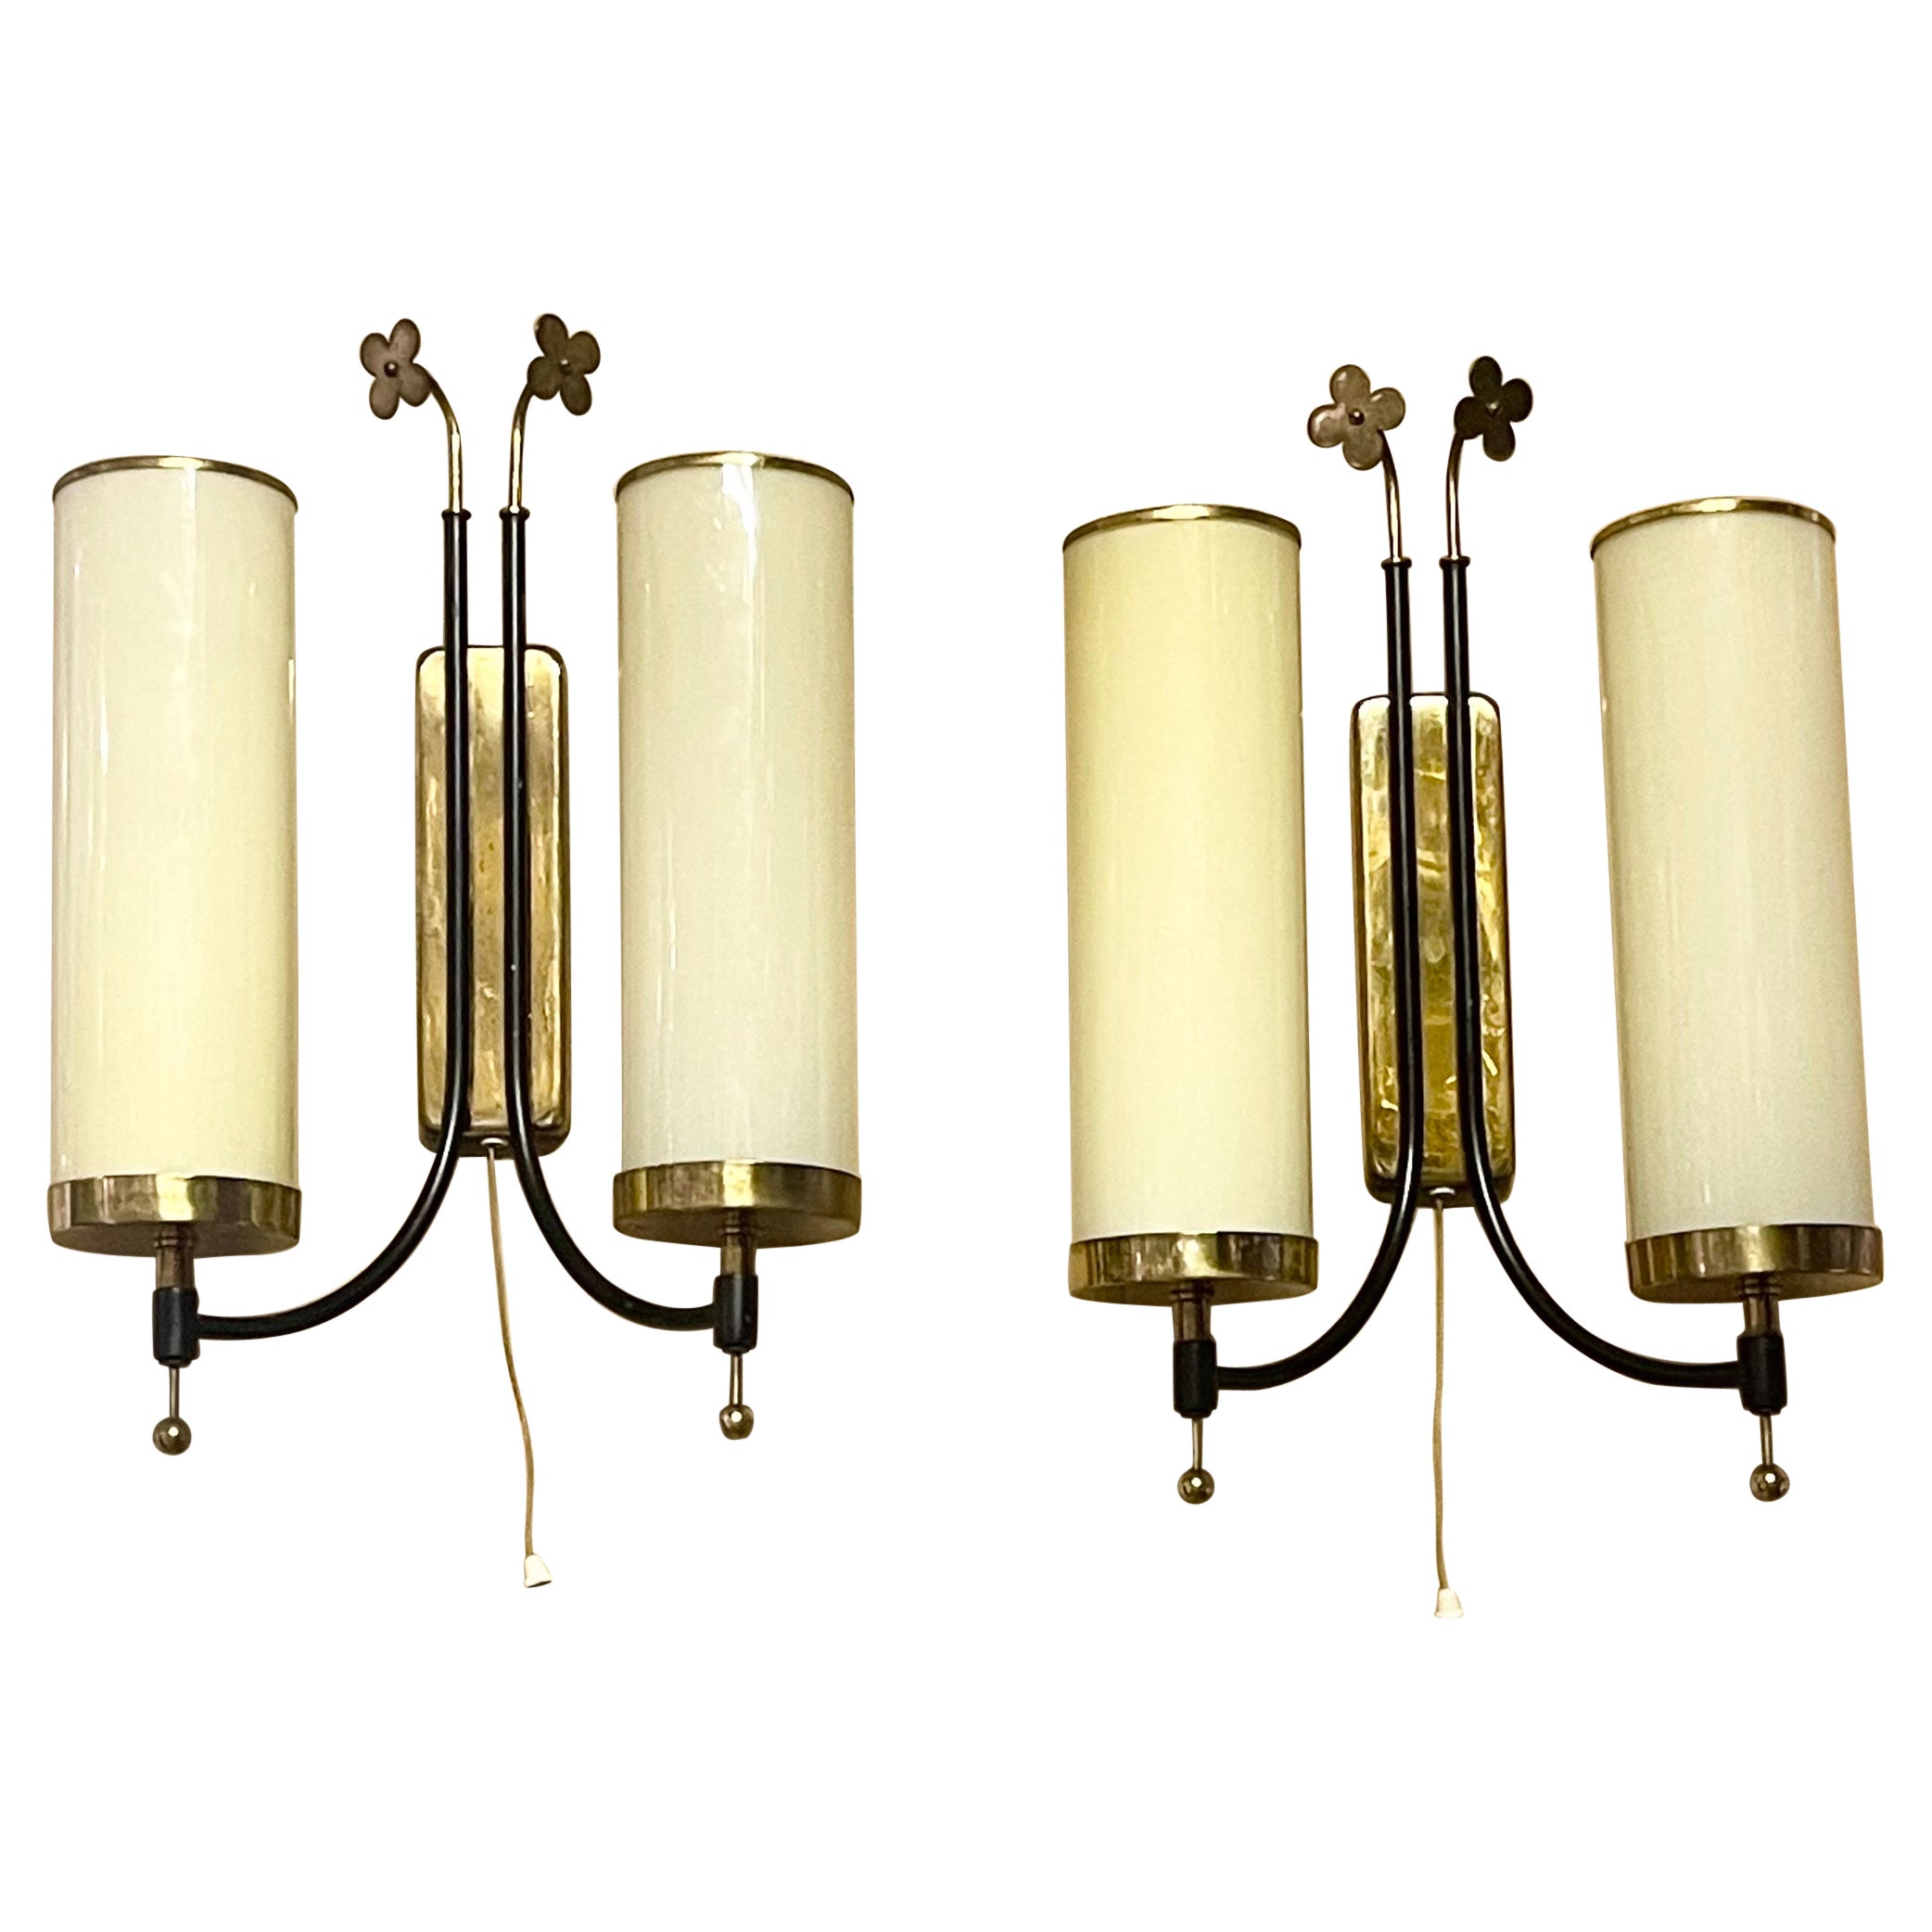 Pair of Scandinavian Tynell Style Opal Glass Tube and Brass Wall Sconces, 1940s For Sale